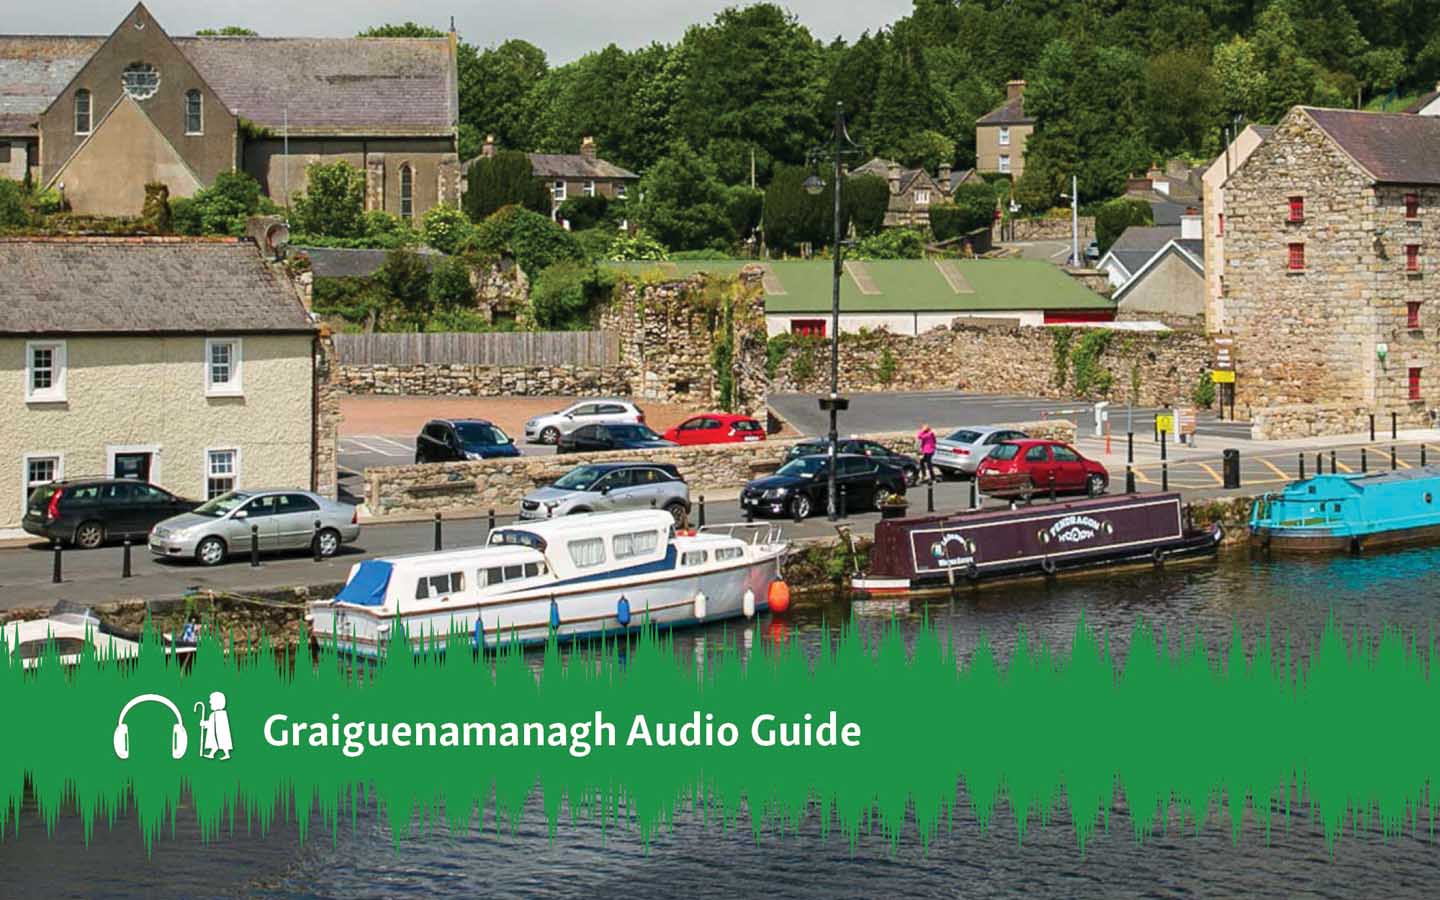 Enjoy river walks and explore atmospheric medieval abbeys with the Graiguenamanagh Audio Guide